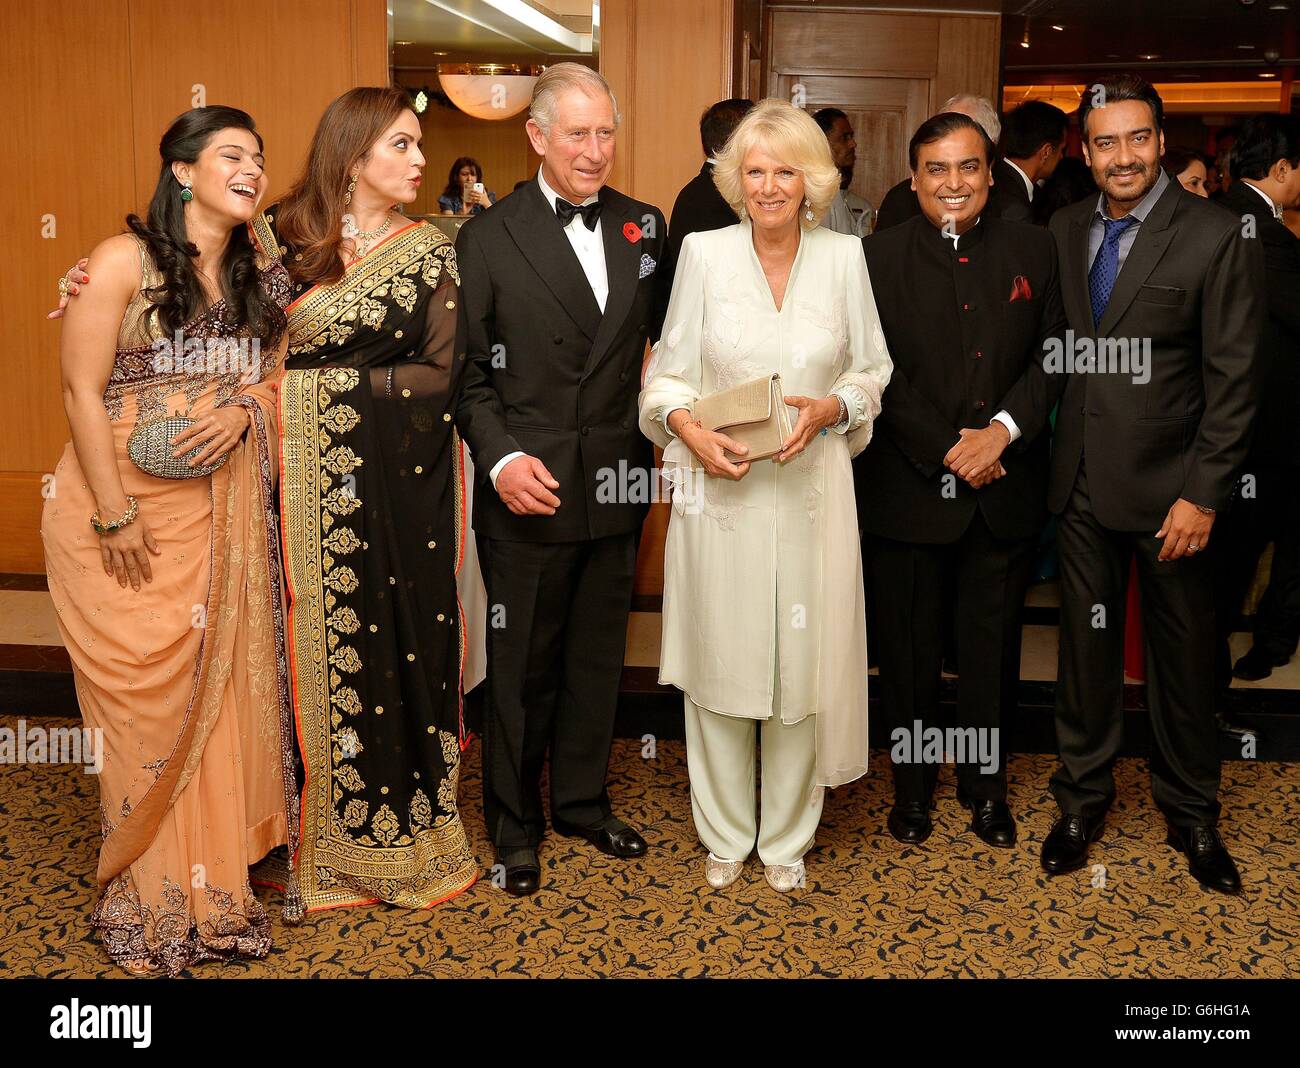 The Prince of Wales and the Duchess of Cornwall with Indian Billionaire Mukesh Ambani (second right) and his wife Nita (second left) and Kajol Devgan (left) and husband Ajay (right), after arriving to attend a charity fund raising dinner in Mumbai India, on the fourth day of their eleven day tour of India and Sri Lanka. Stock Photo